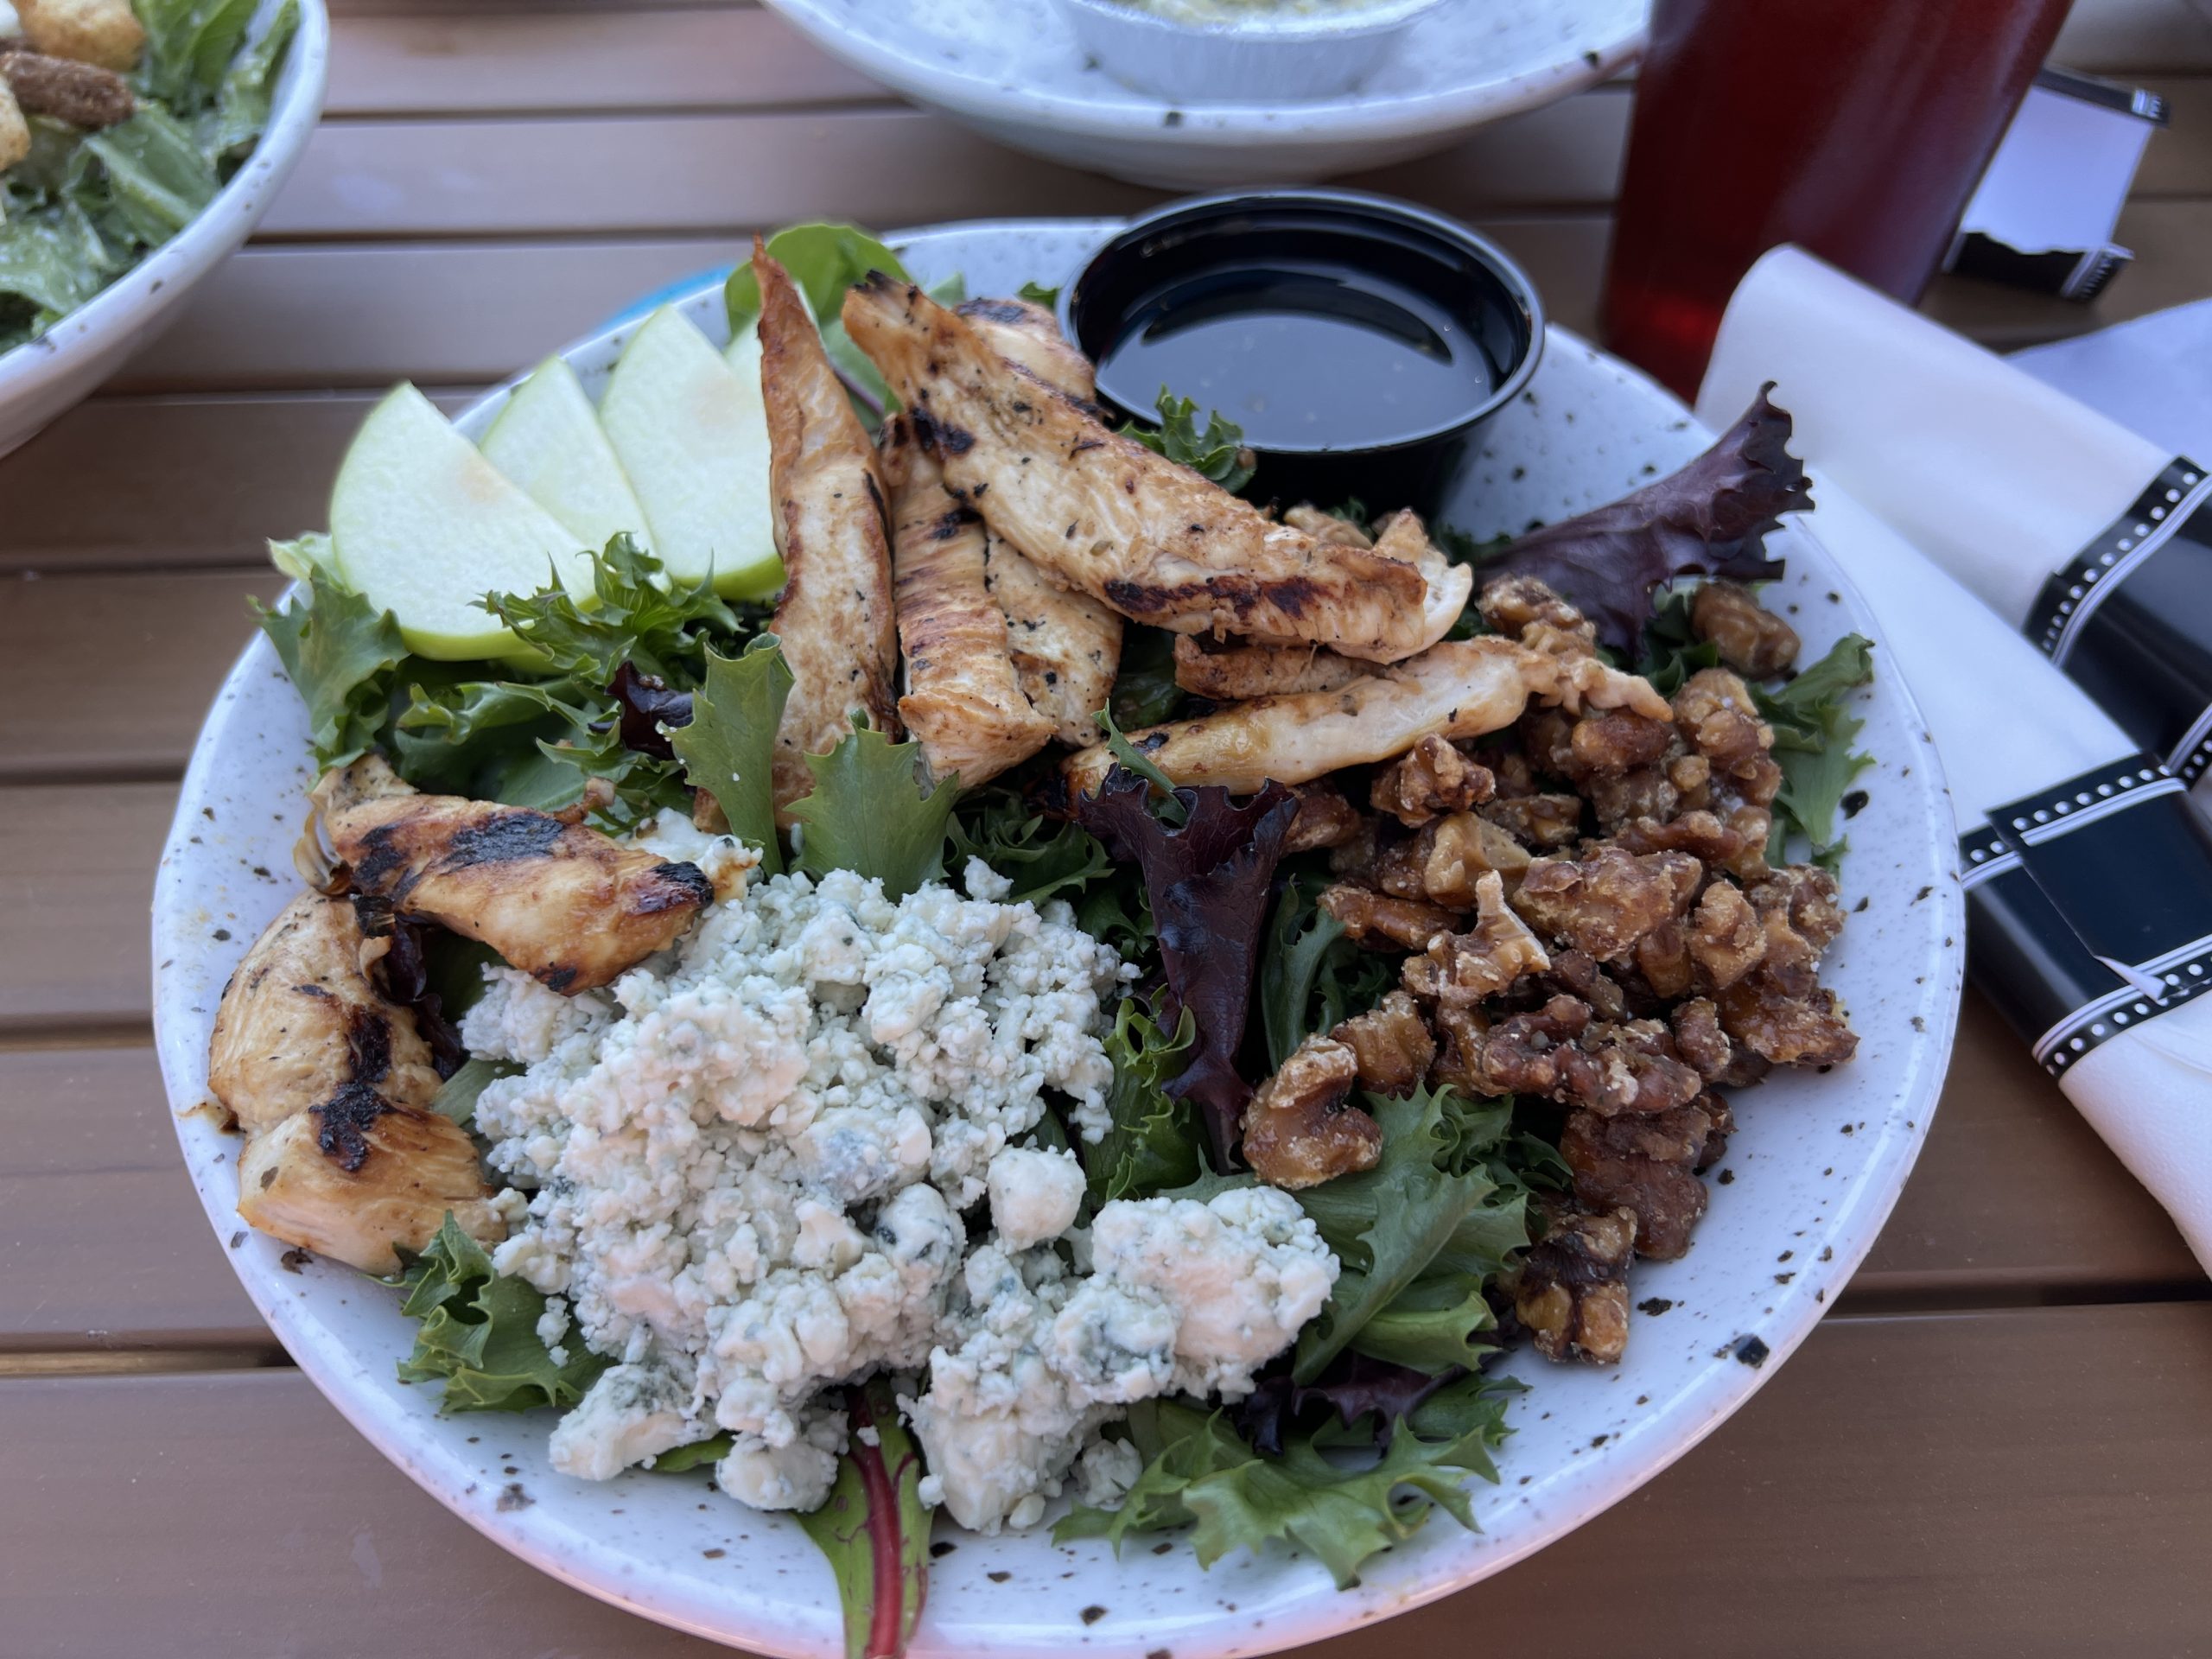 Salad with chicken and walnuts at Seaport Pier Restaurant in North Wildwood for kids